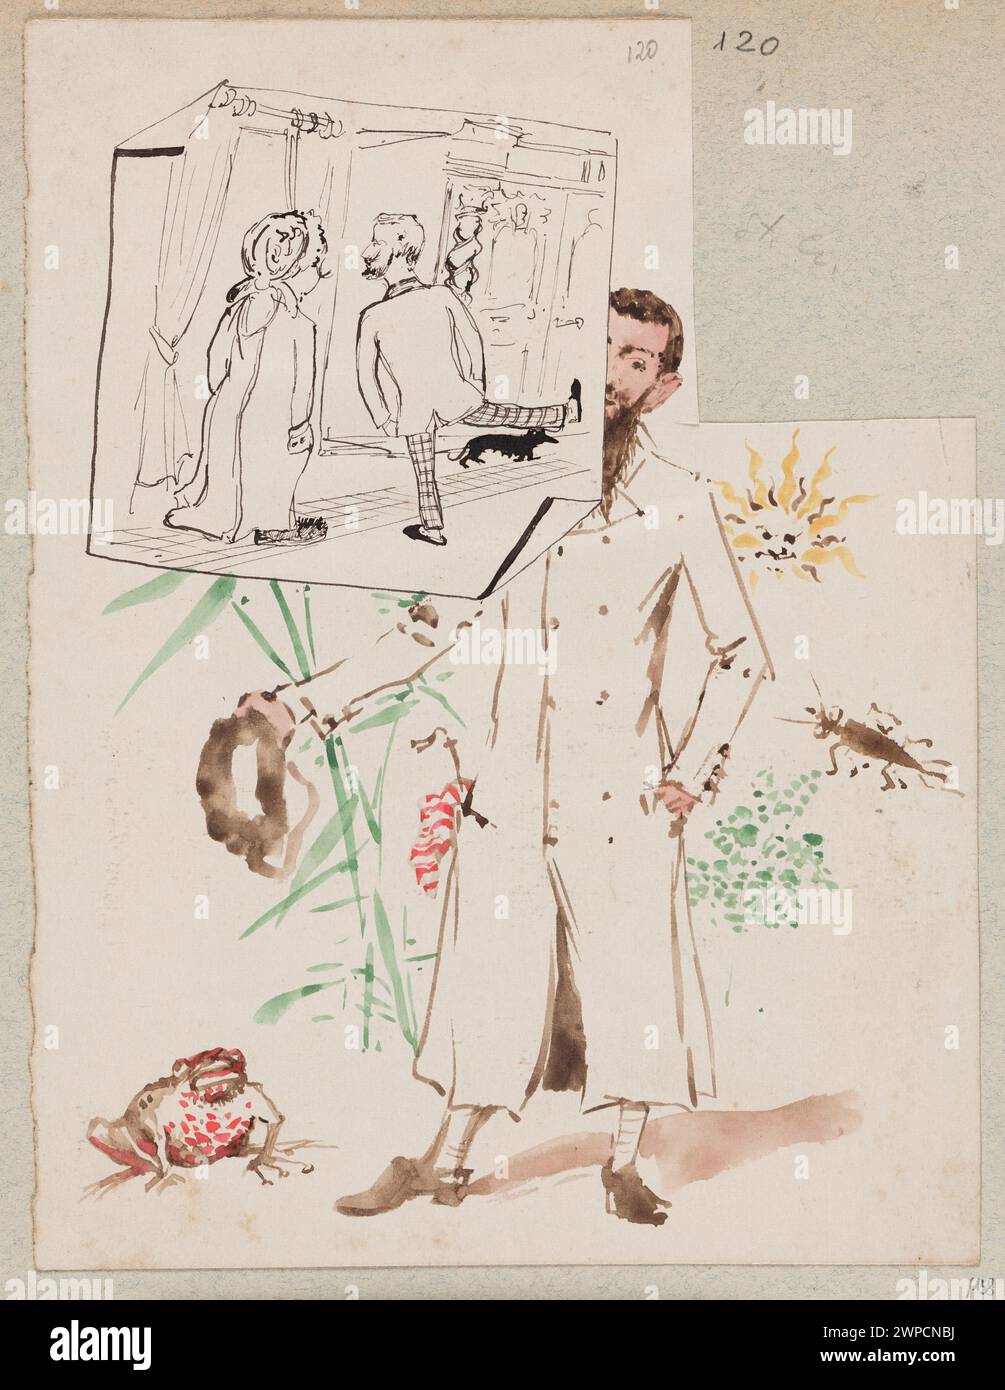 A man in the meadow, a generic scene in the interior; Czachórski, Stanisław (1853-1904); before 1904 (1873-00-00-1904-00-00);Sun, beards (beard), hats (headgear), women, standing man, insects, portraits, men's portraits, dogs, genre scenes, interiors, purchase (provenance), animals, meadows, frogs Stock Photo